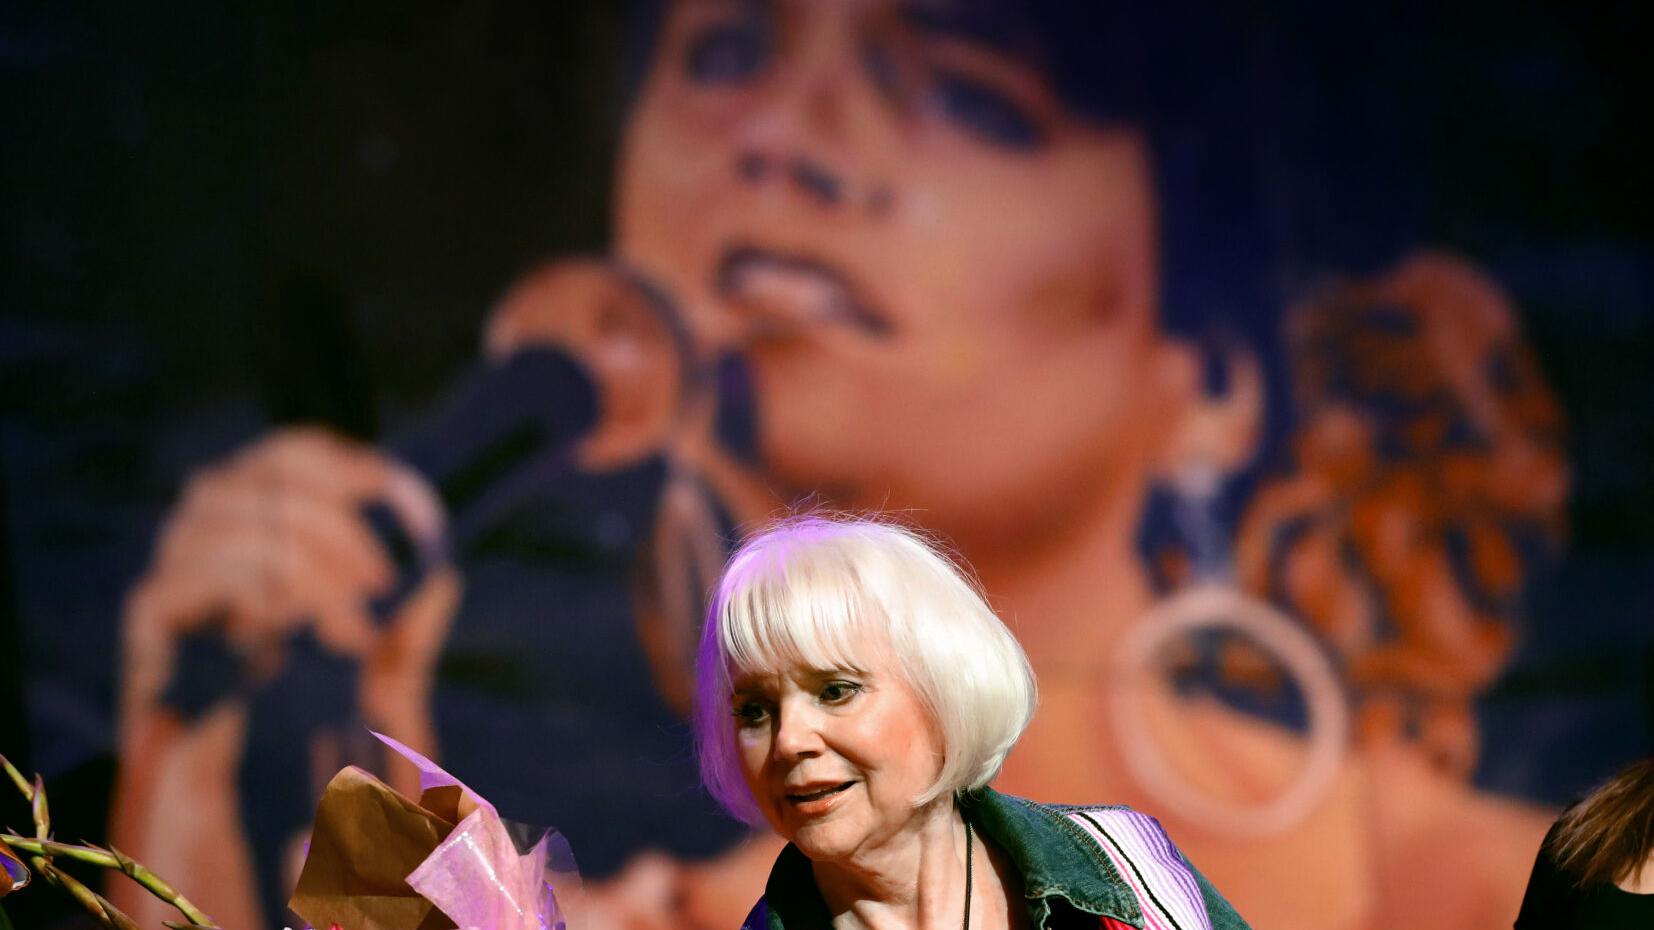 This artist was inspired by Linda Ronstadt. Now his mural will hang at the newly renamed music hall